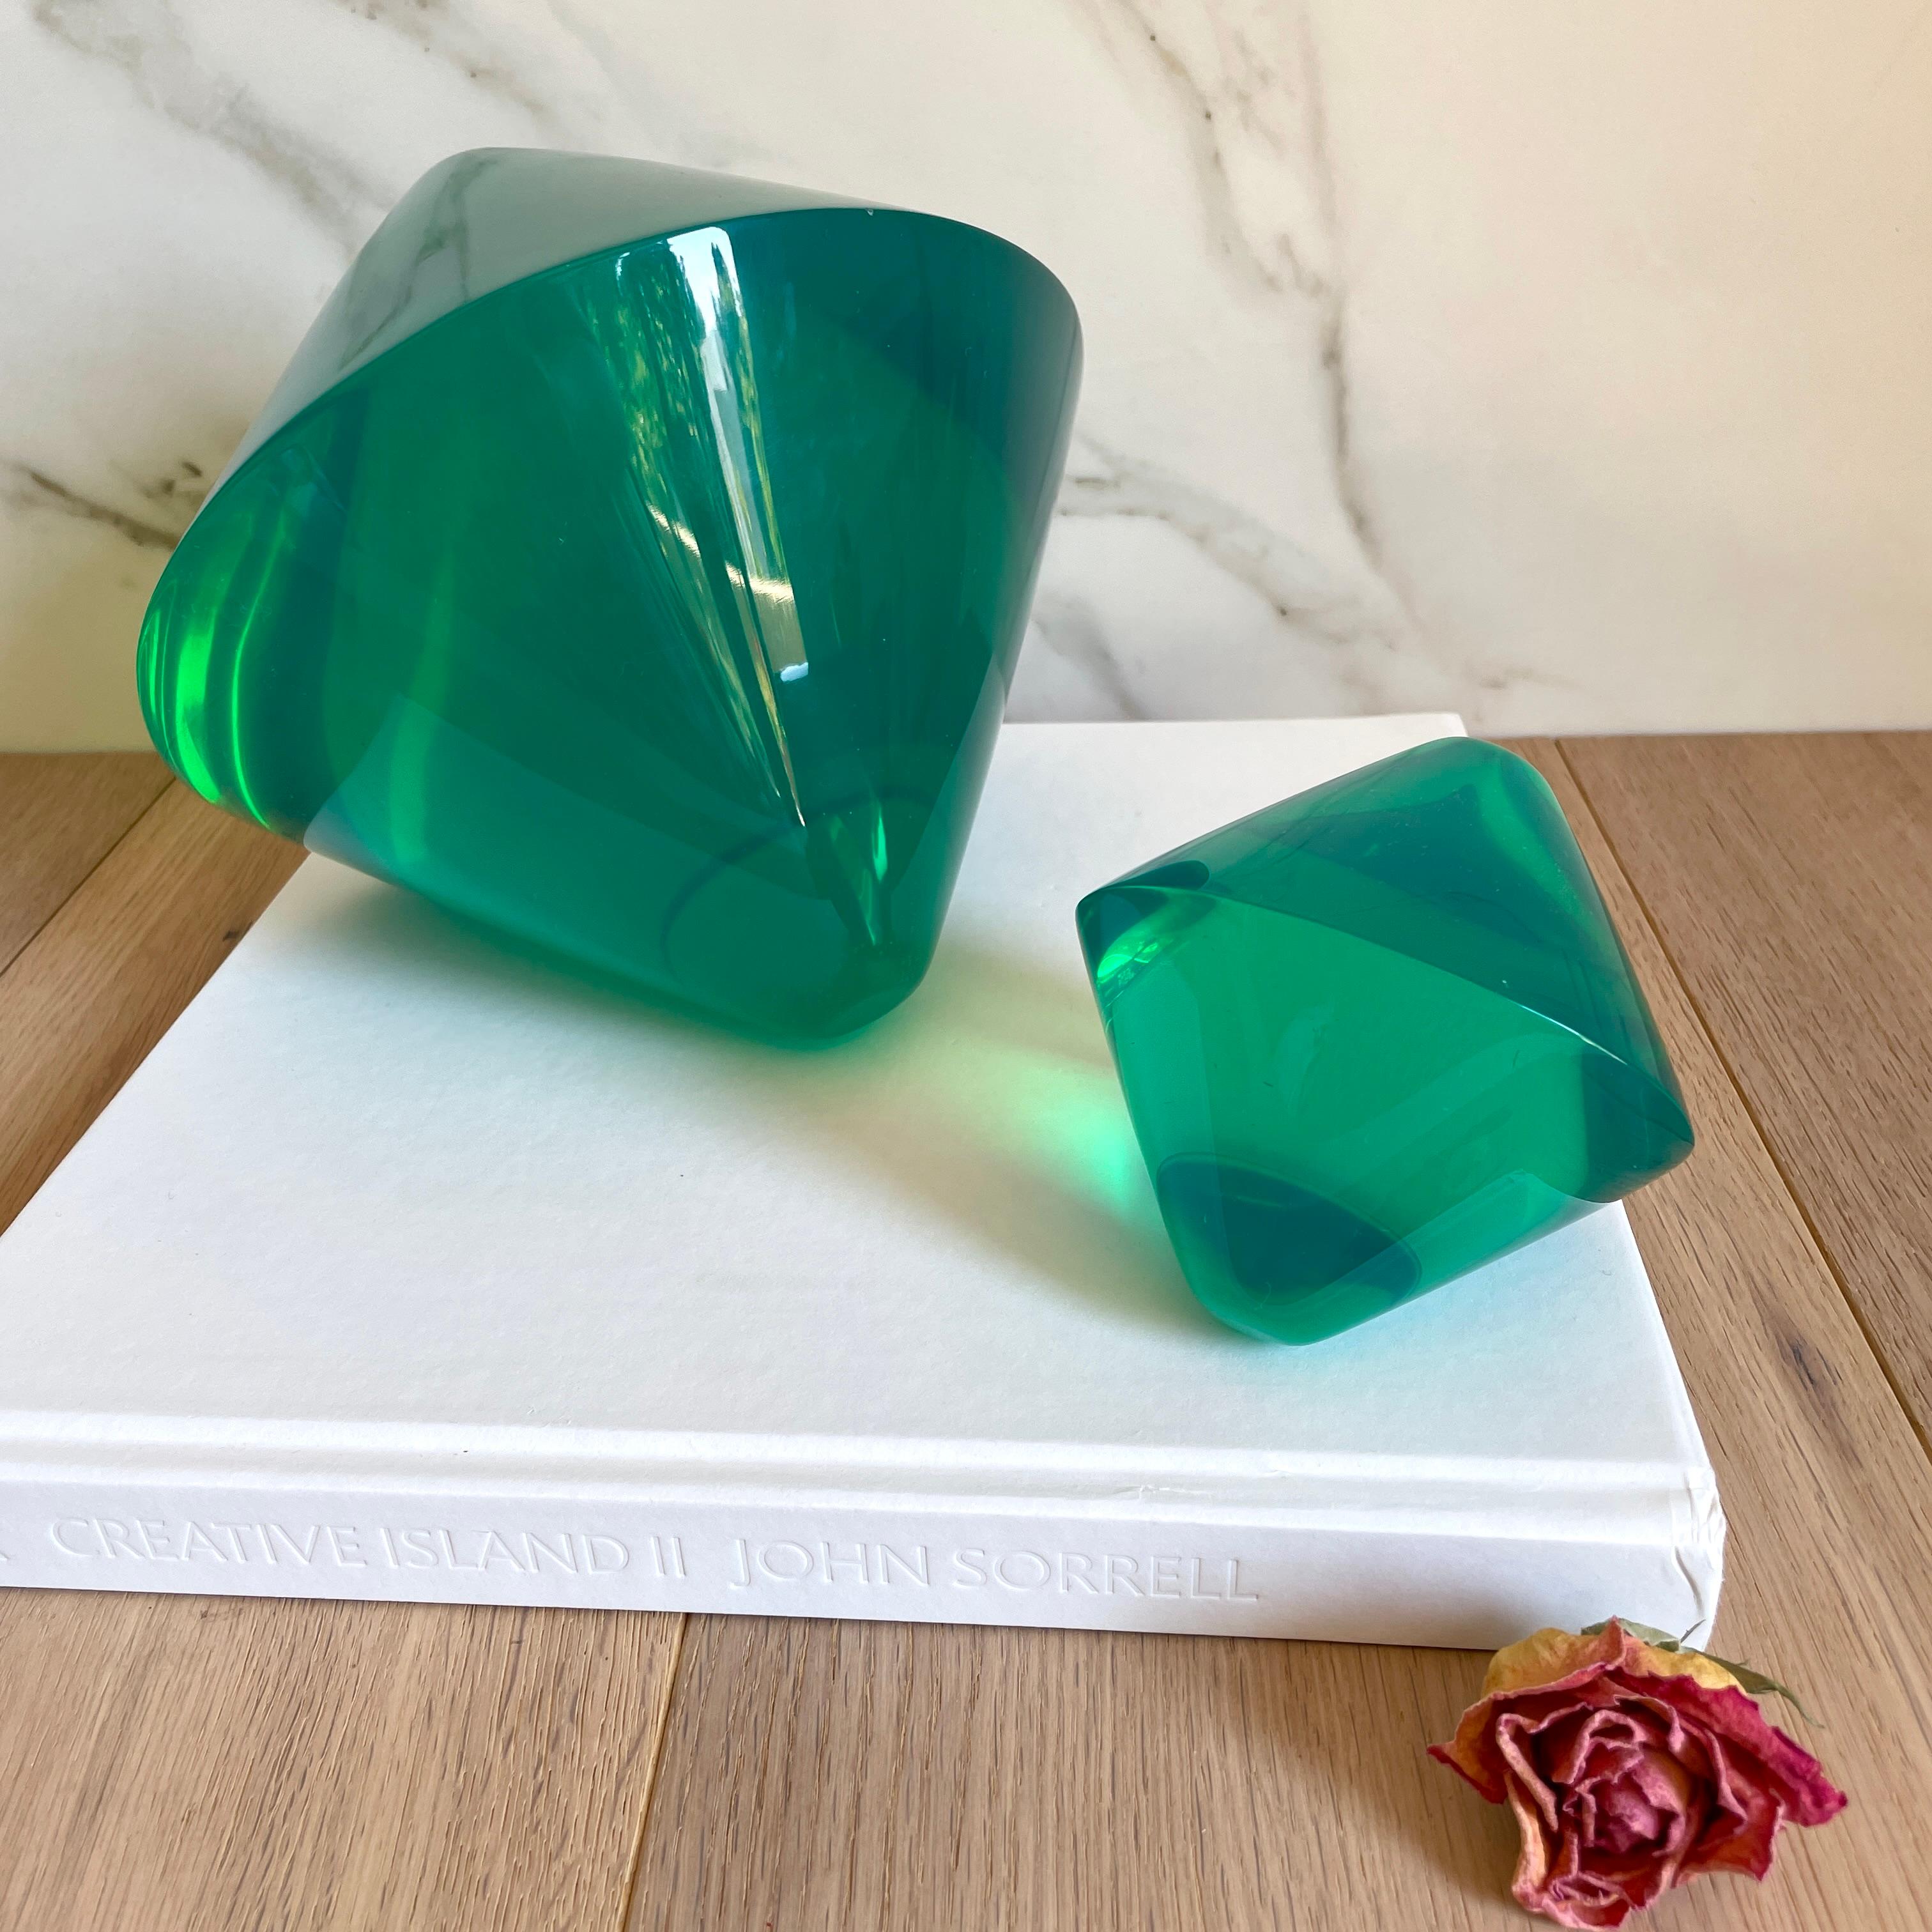 This modern geometric sculptures will add a touch of color to any space, you can place them on top of books on your coffee table or even as a centerpiece. The possibilities are endless.
We recommend mixing both sizes available to create more of a